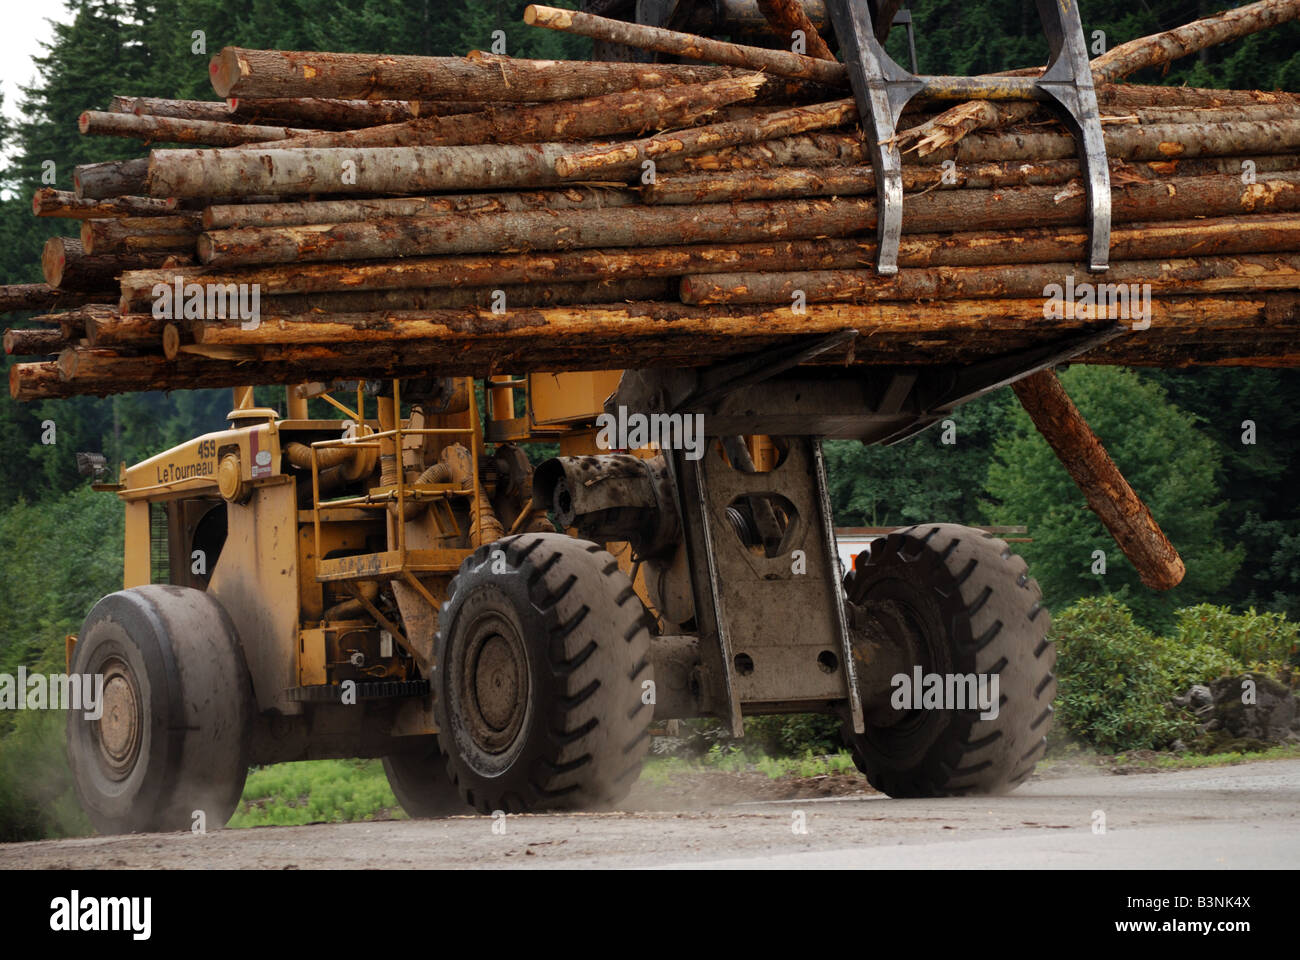 A logging truck at the wood mill in Darrington, WA. Stock Photo